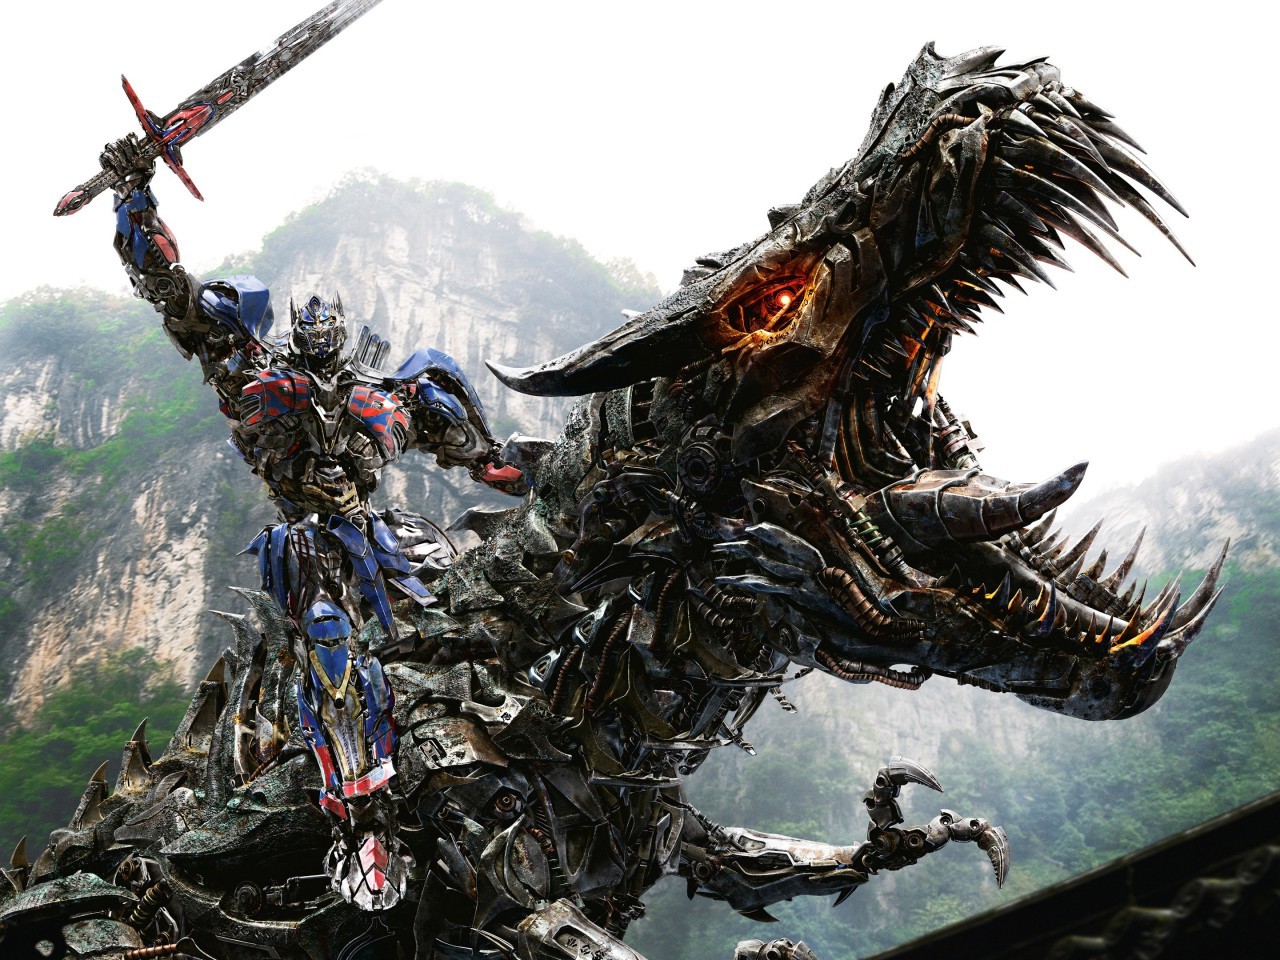 for ios download Transformers: Age of Extinction